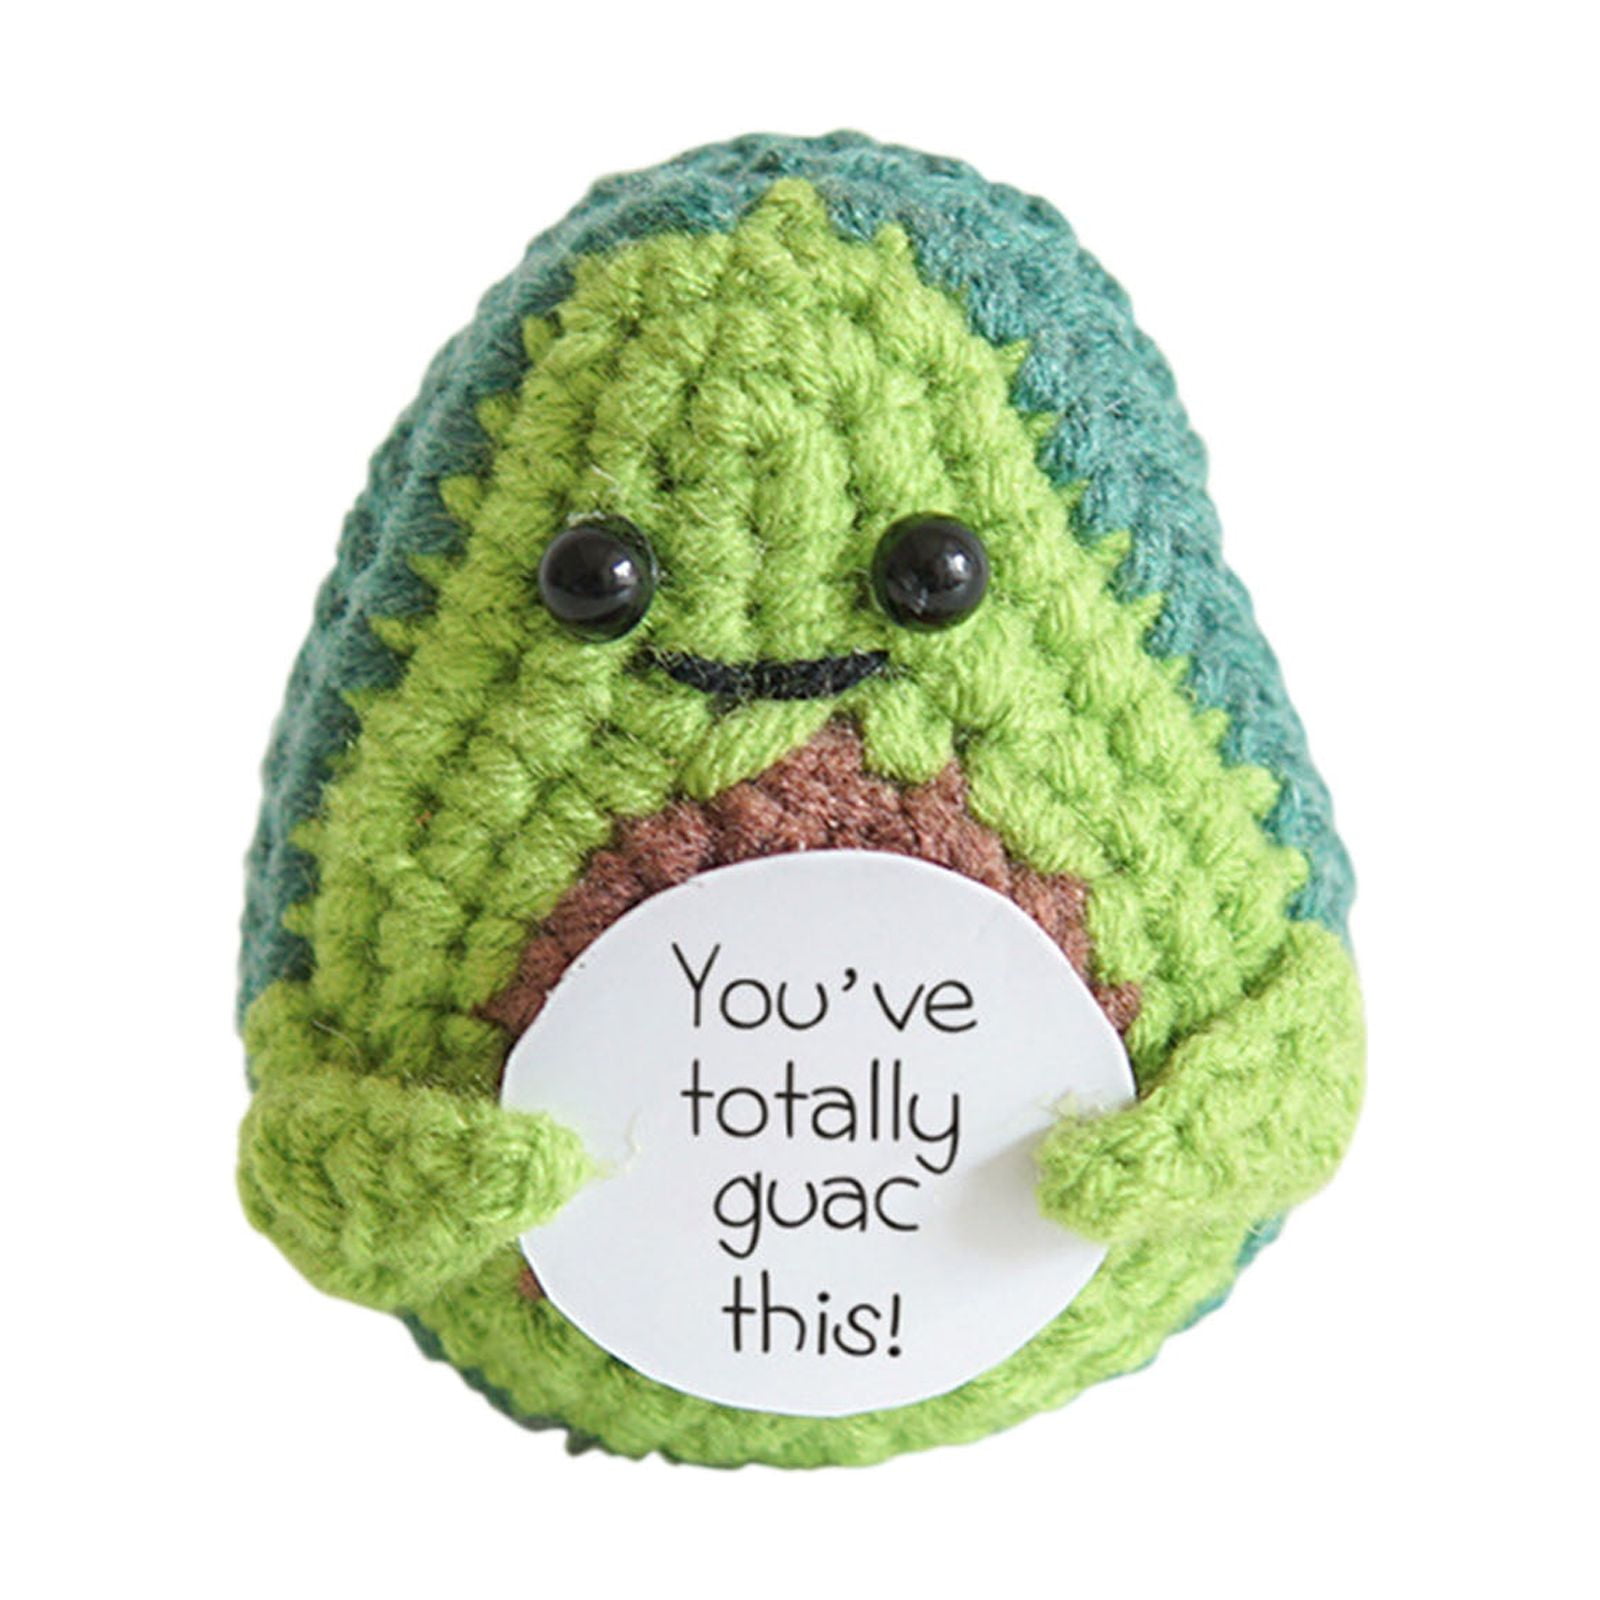 Emotional Support Pickle - $10 - Crocheted with Love by Robin